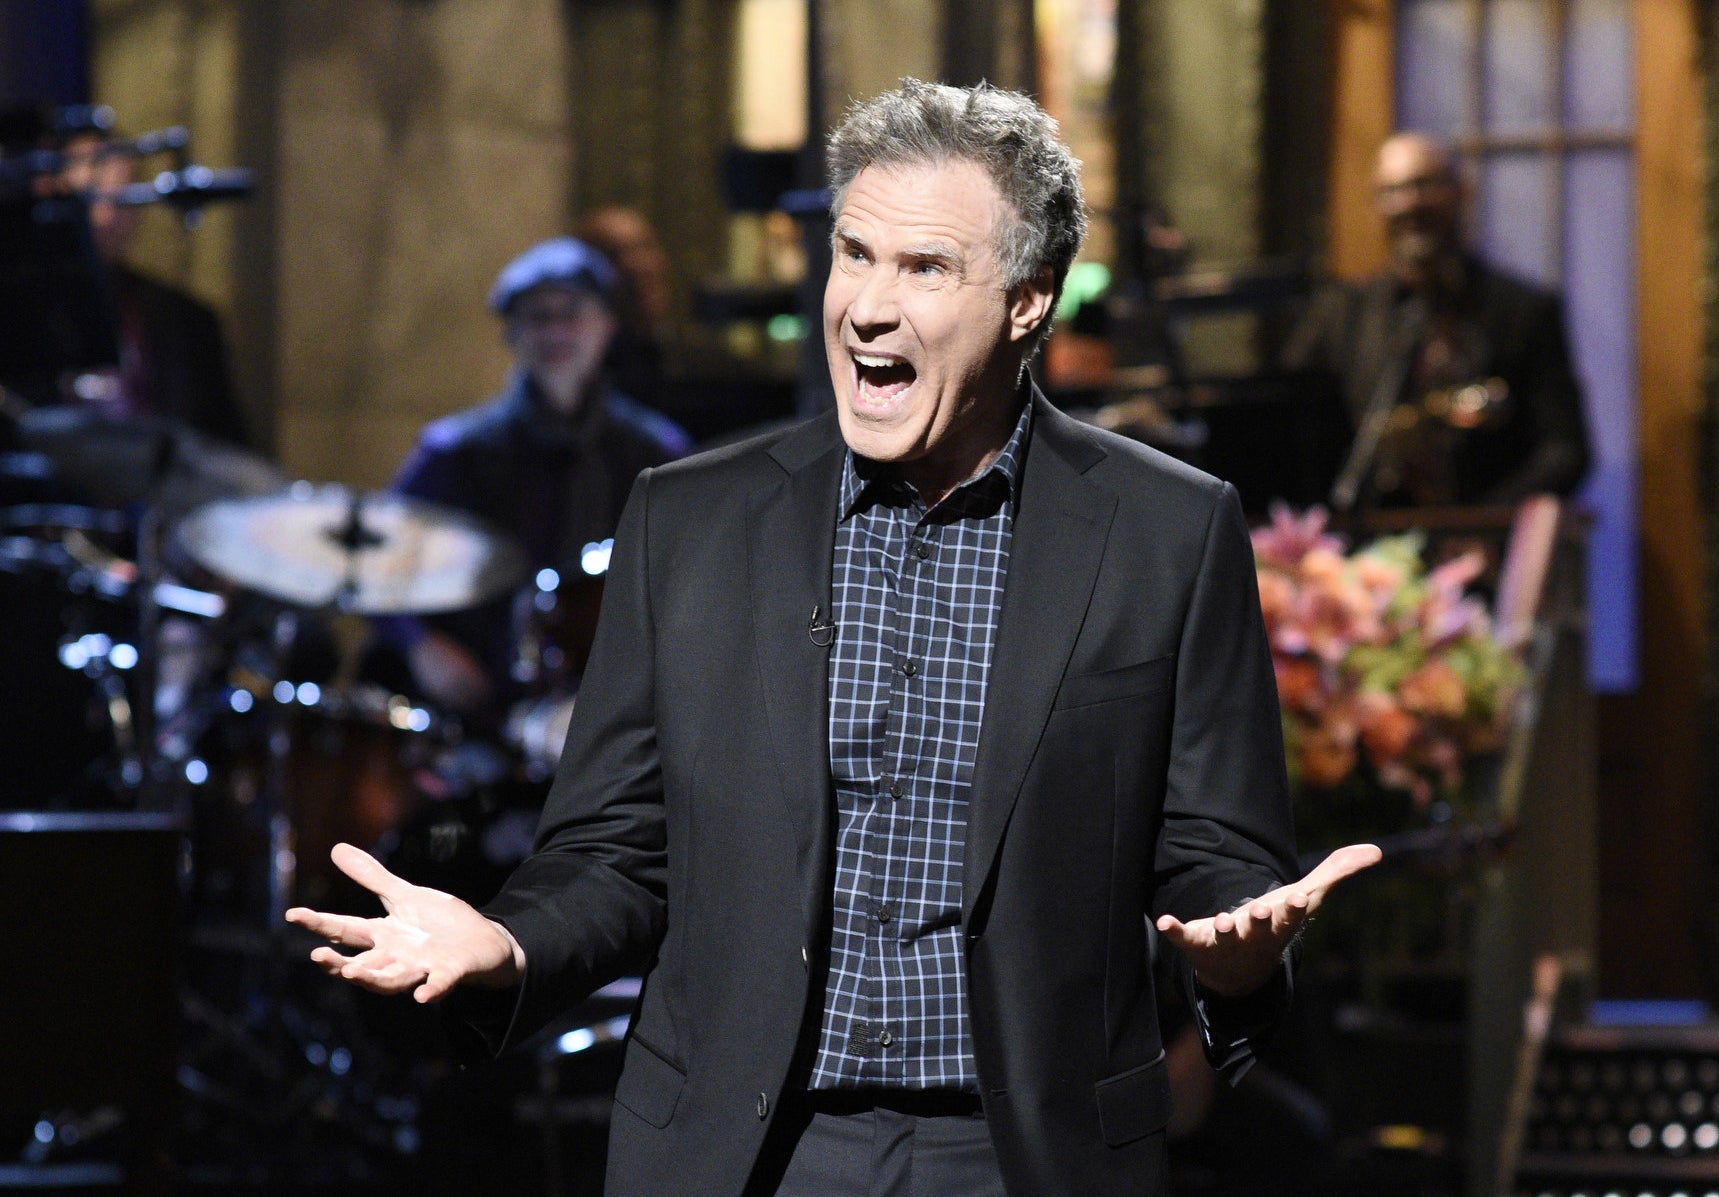 Will Ferrell hosting SNL on stage